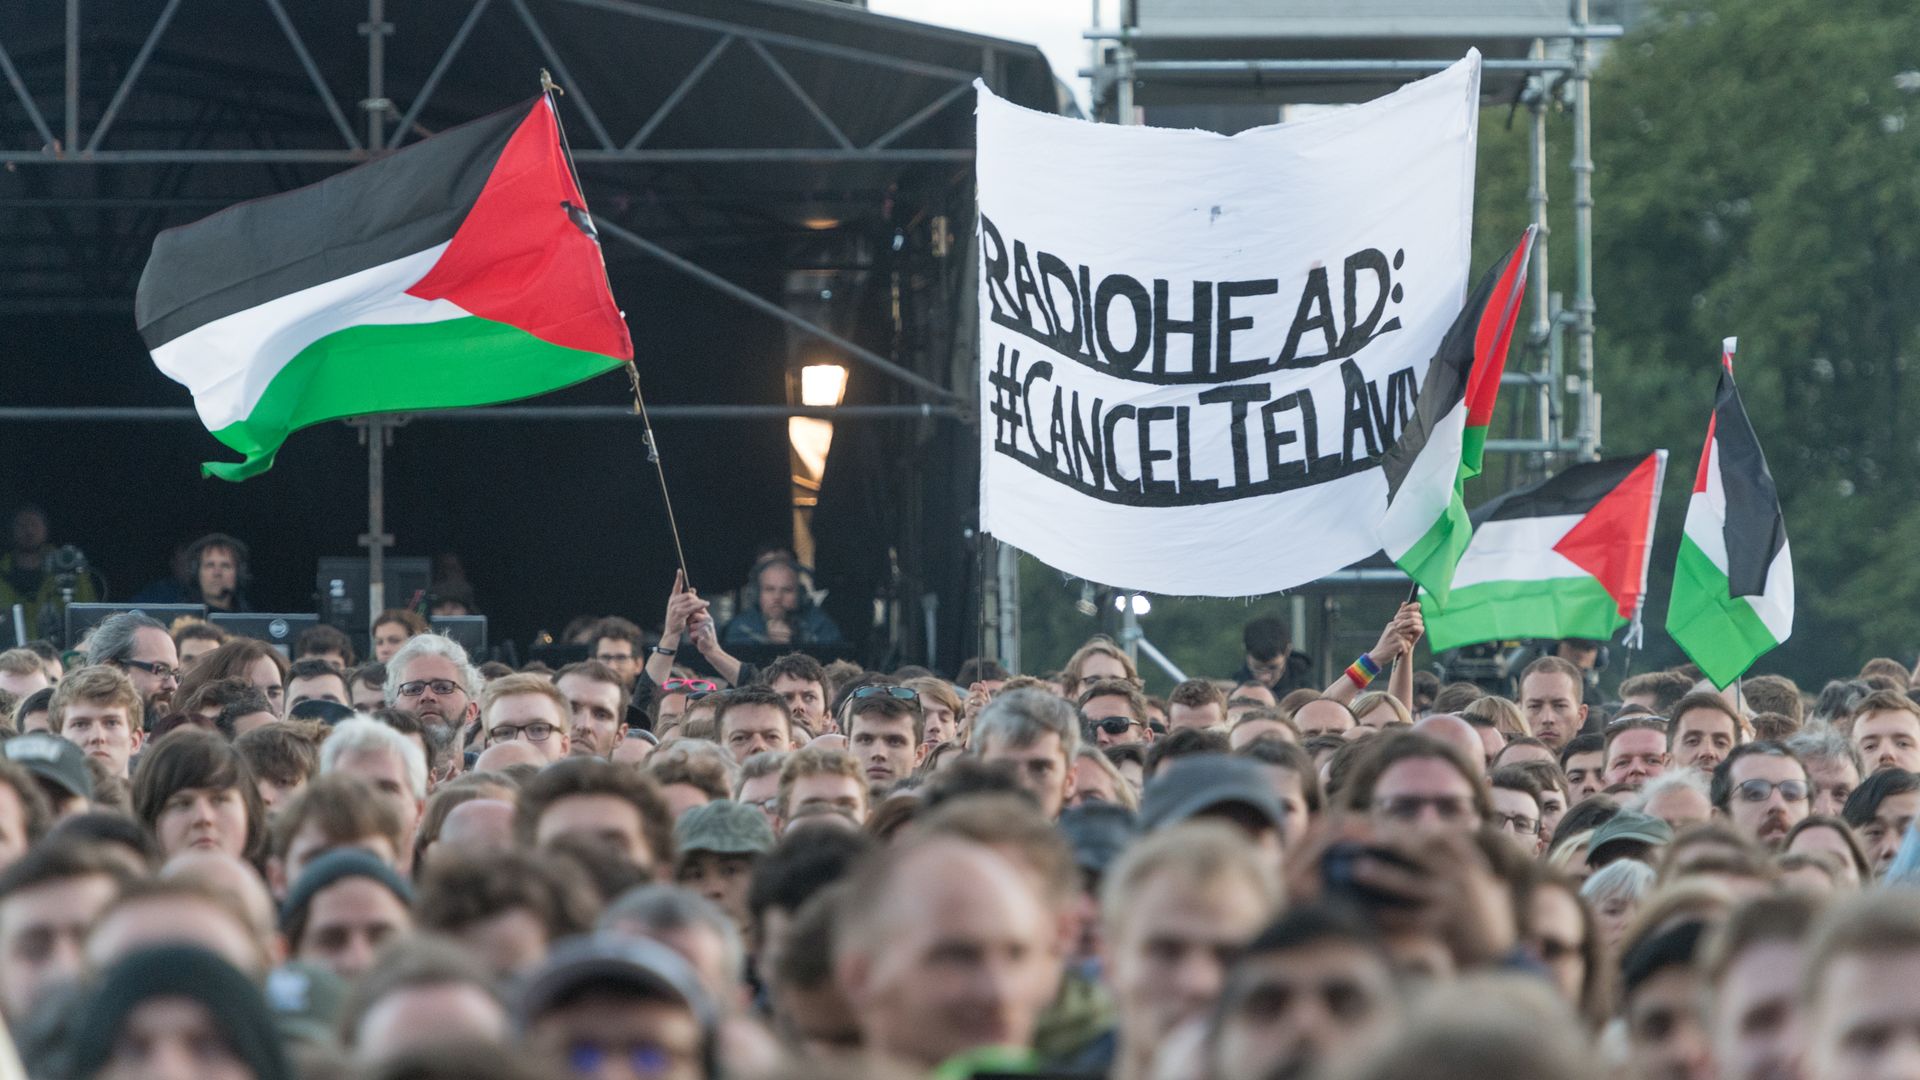 Protestors hold up a banner calling for Radiohead to cancel a show in Israel.